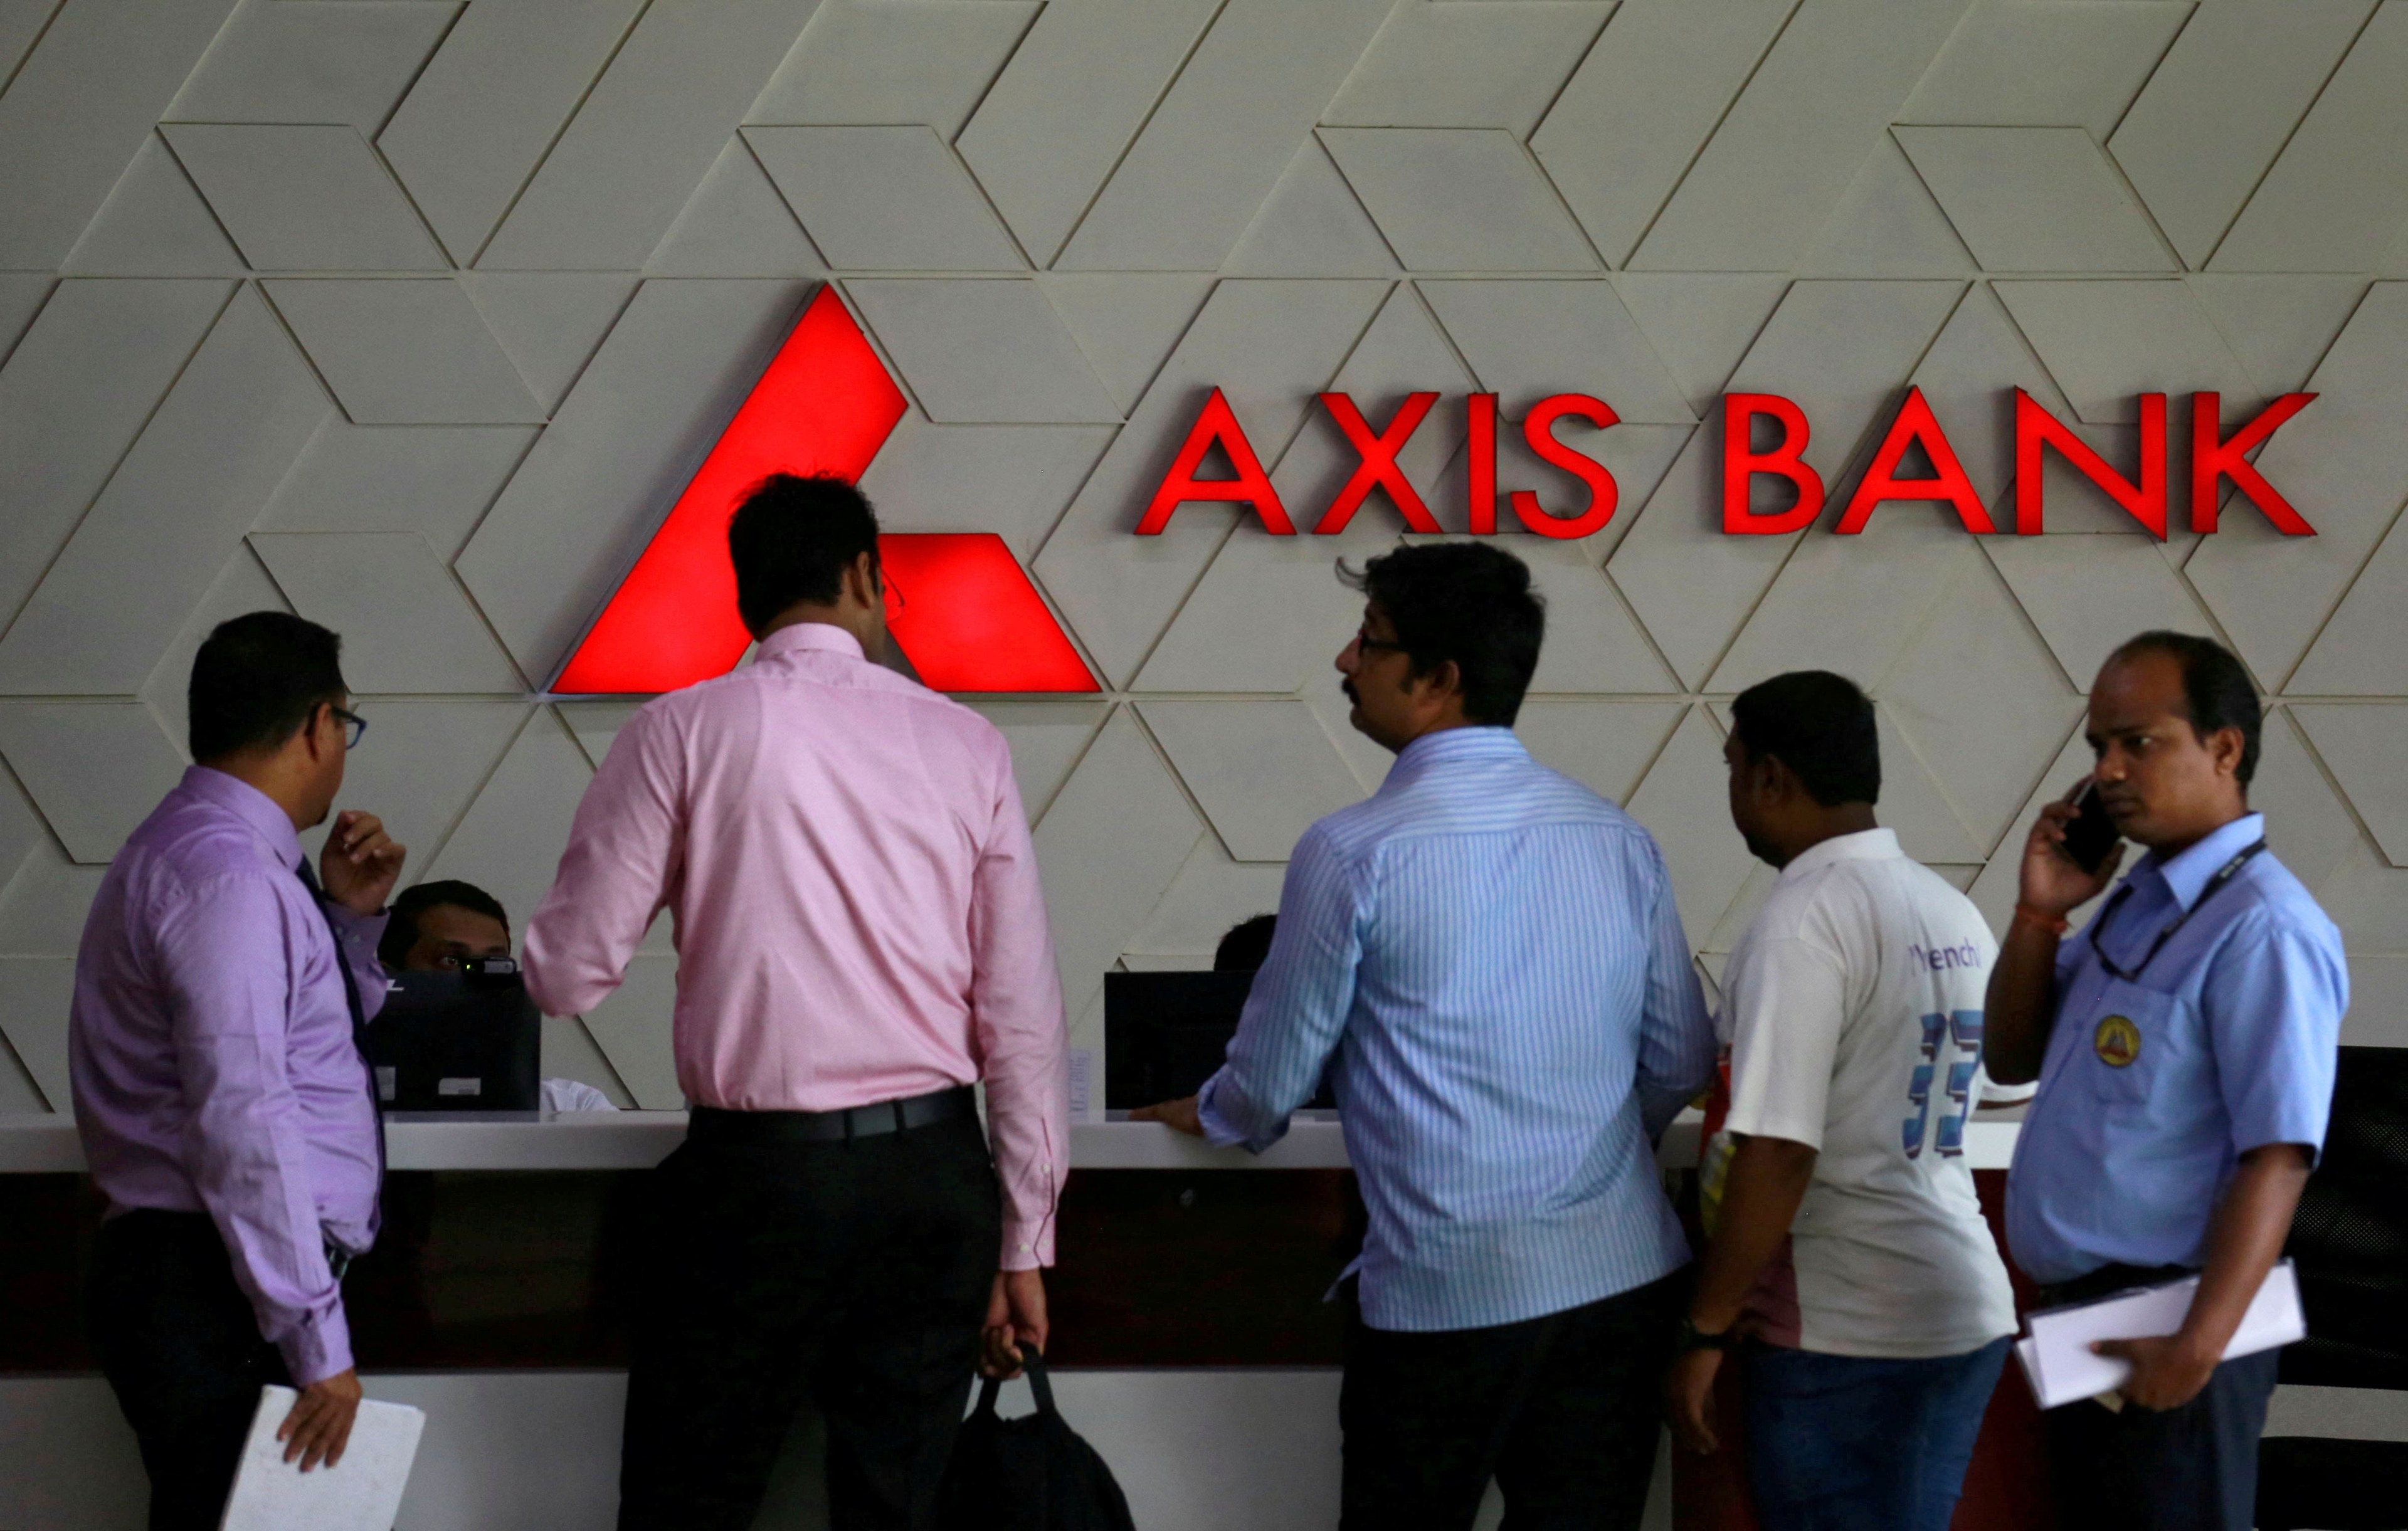 Axis Bank's credit card base will grow by 31%, with significant increases in customer spending.